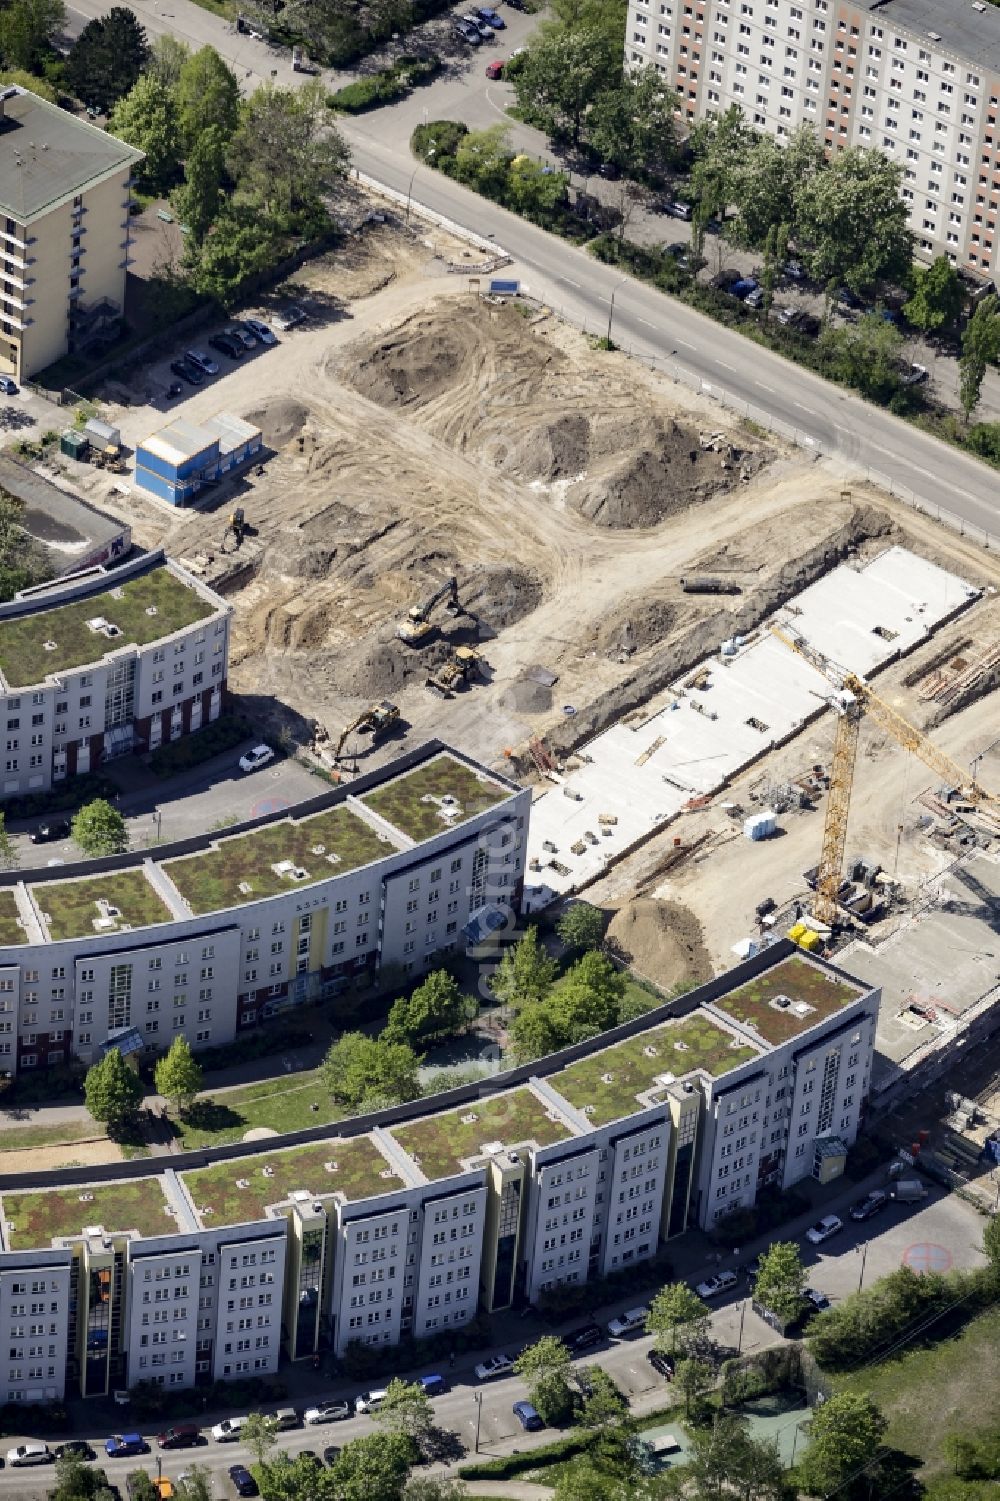 Aerial image Berlin - Construction site of a new multi-family residential area with apartment buildings on Gensinger Strasse in the Lichtenberg district of Berlin, Germany